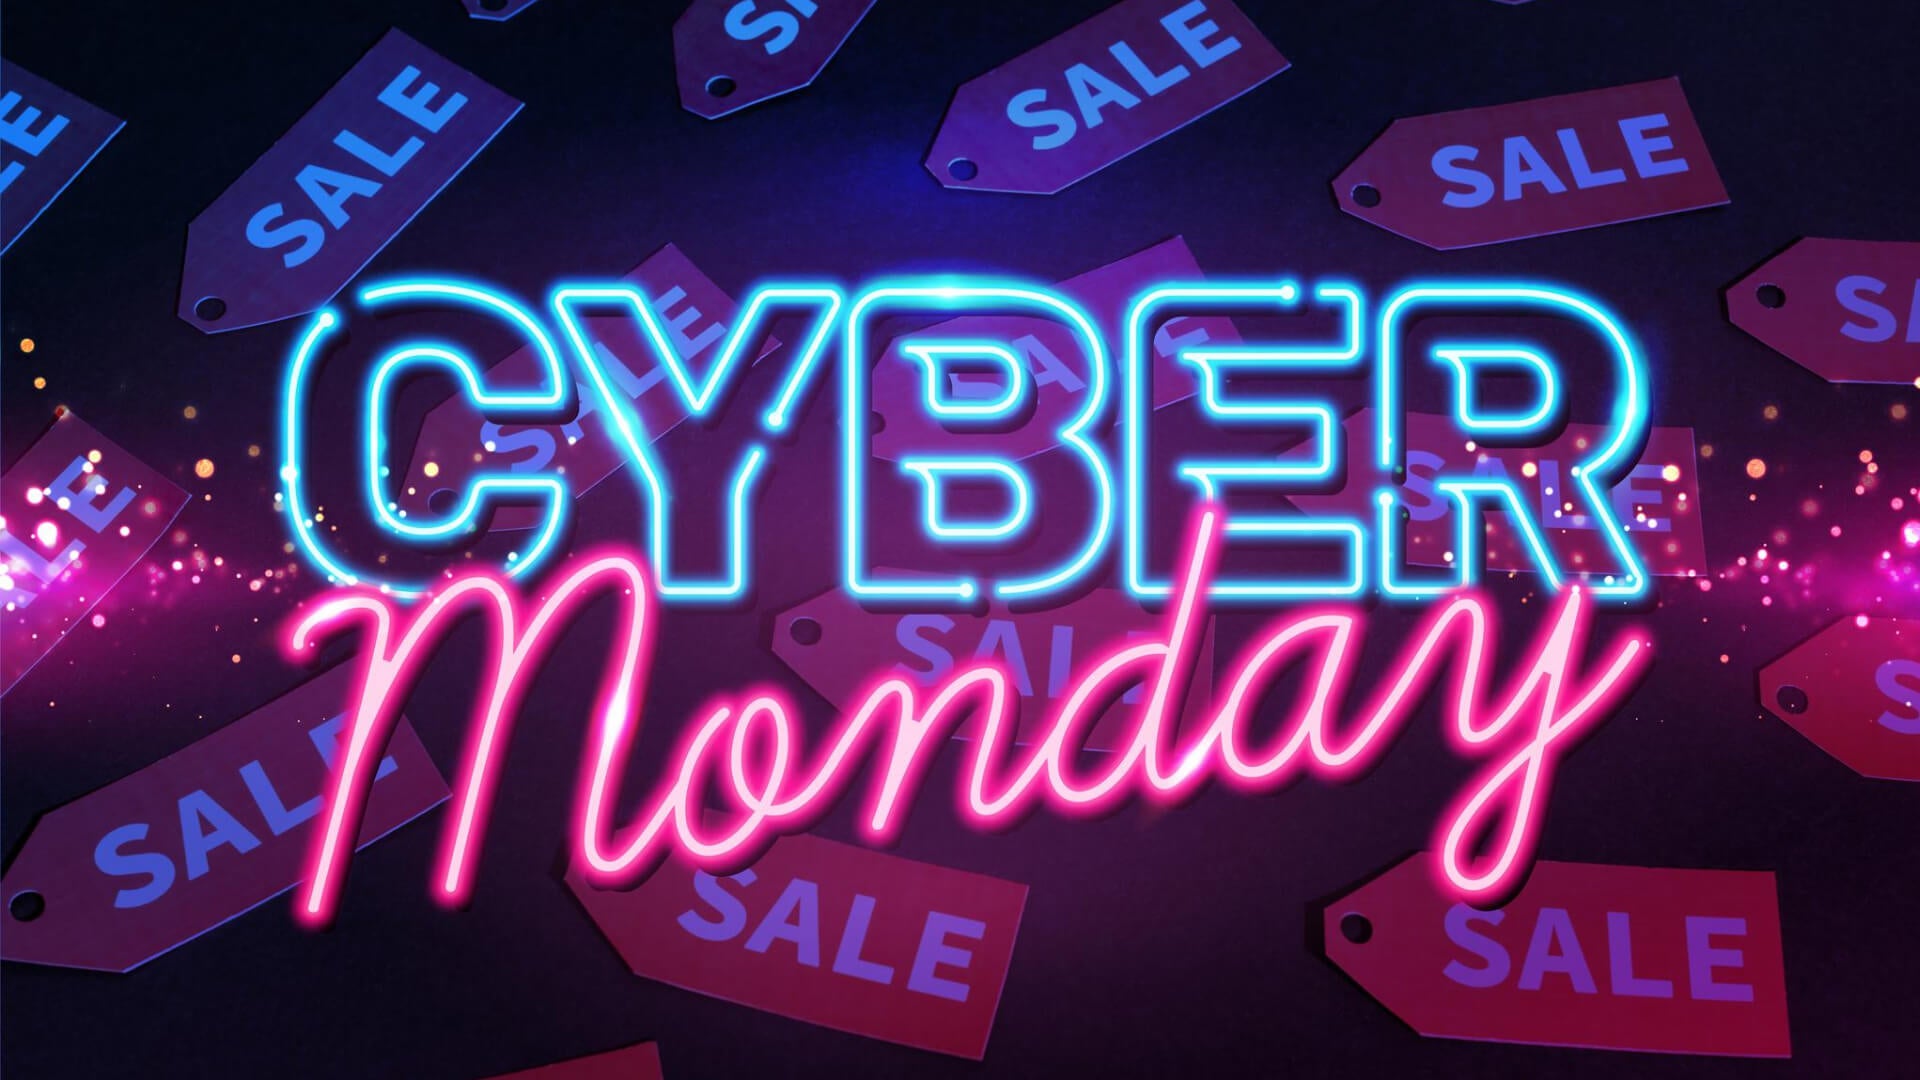 Cyber monday week sale picture